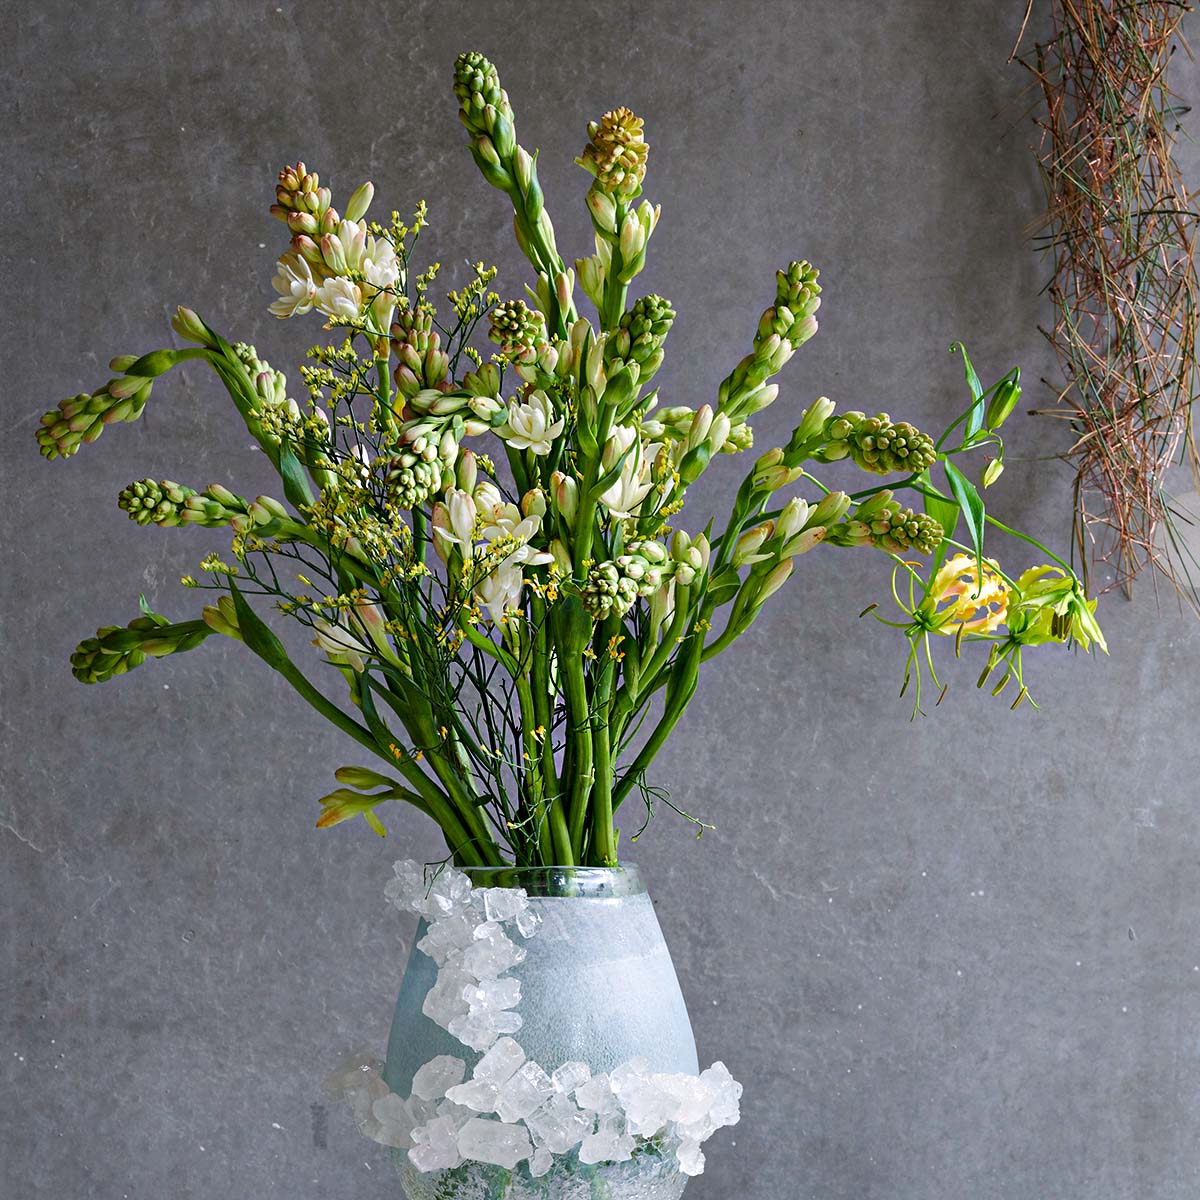 How to Get the Most Out of the Lovely Smelling Polianthes Tuberosa